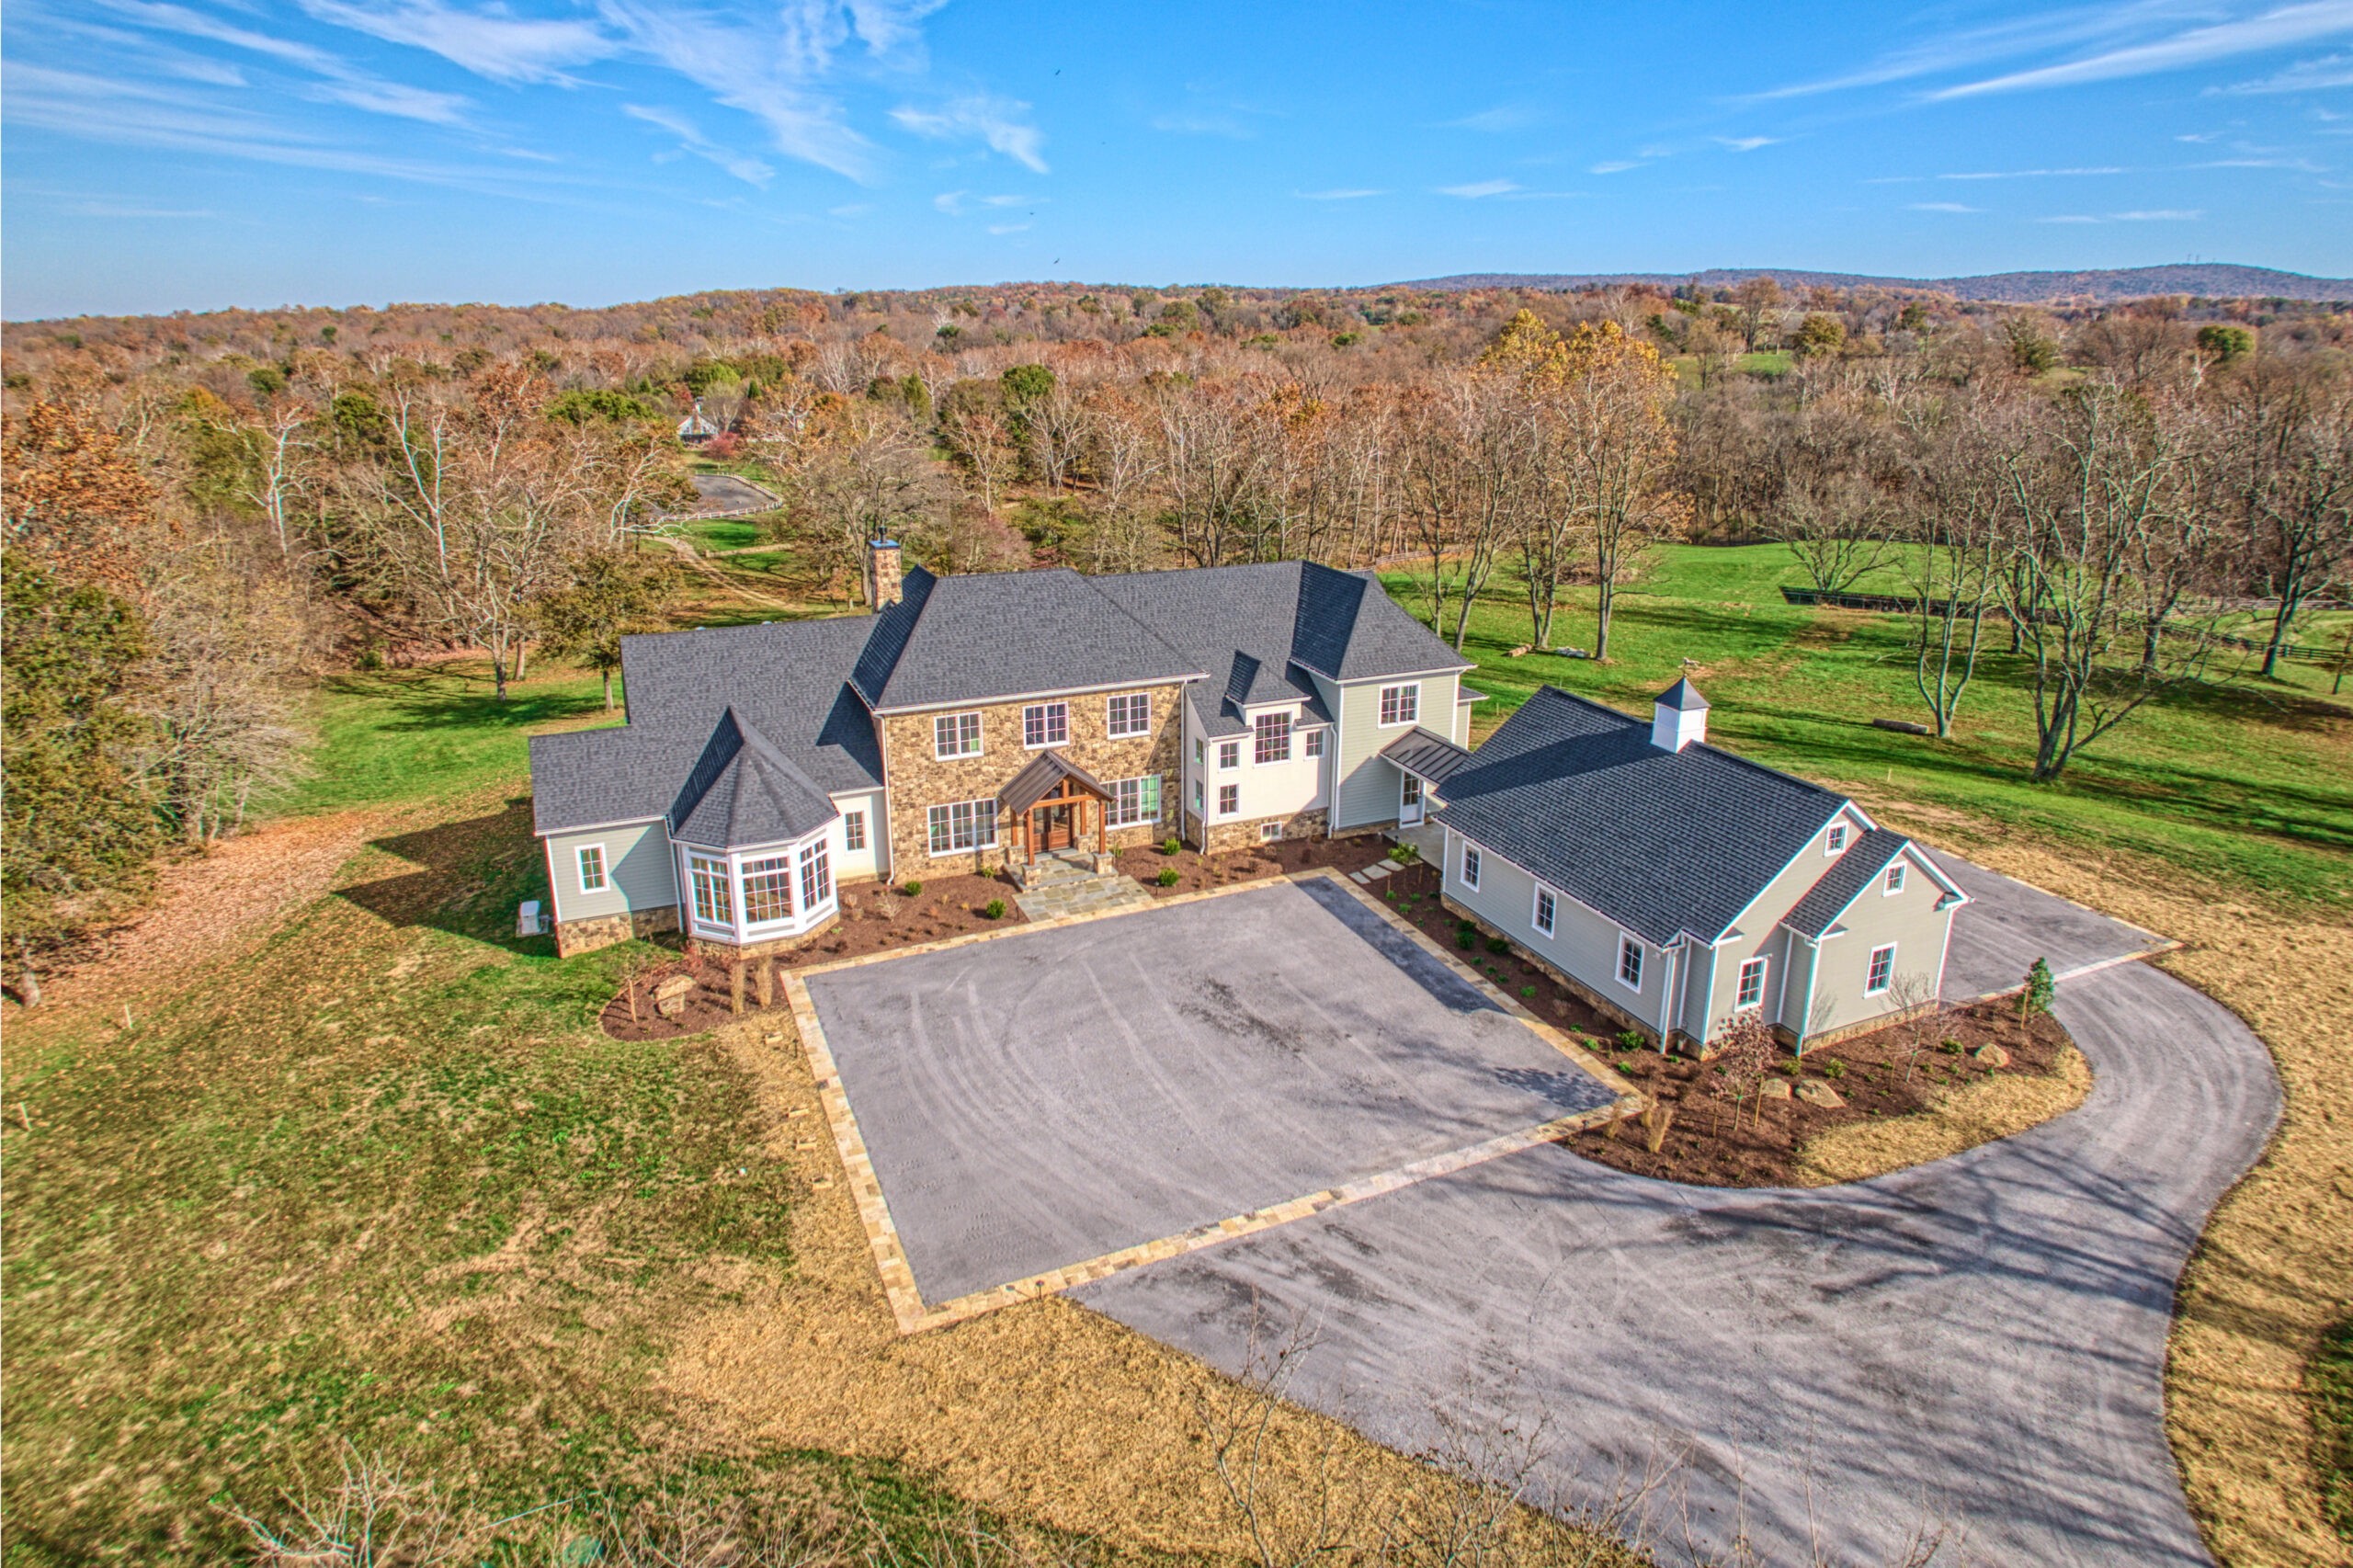 Professional exterior drone photo of custom build home in Middleburg, VA - showing the new single family home with separate 4-car garage, large square parking area in the front and driveway circling around to the rear of the garage